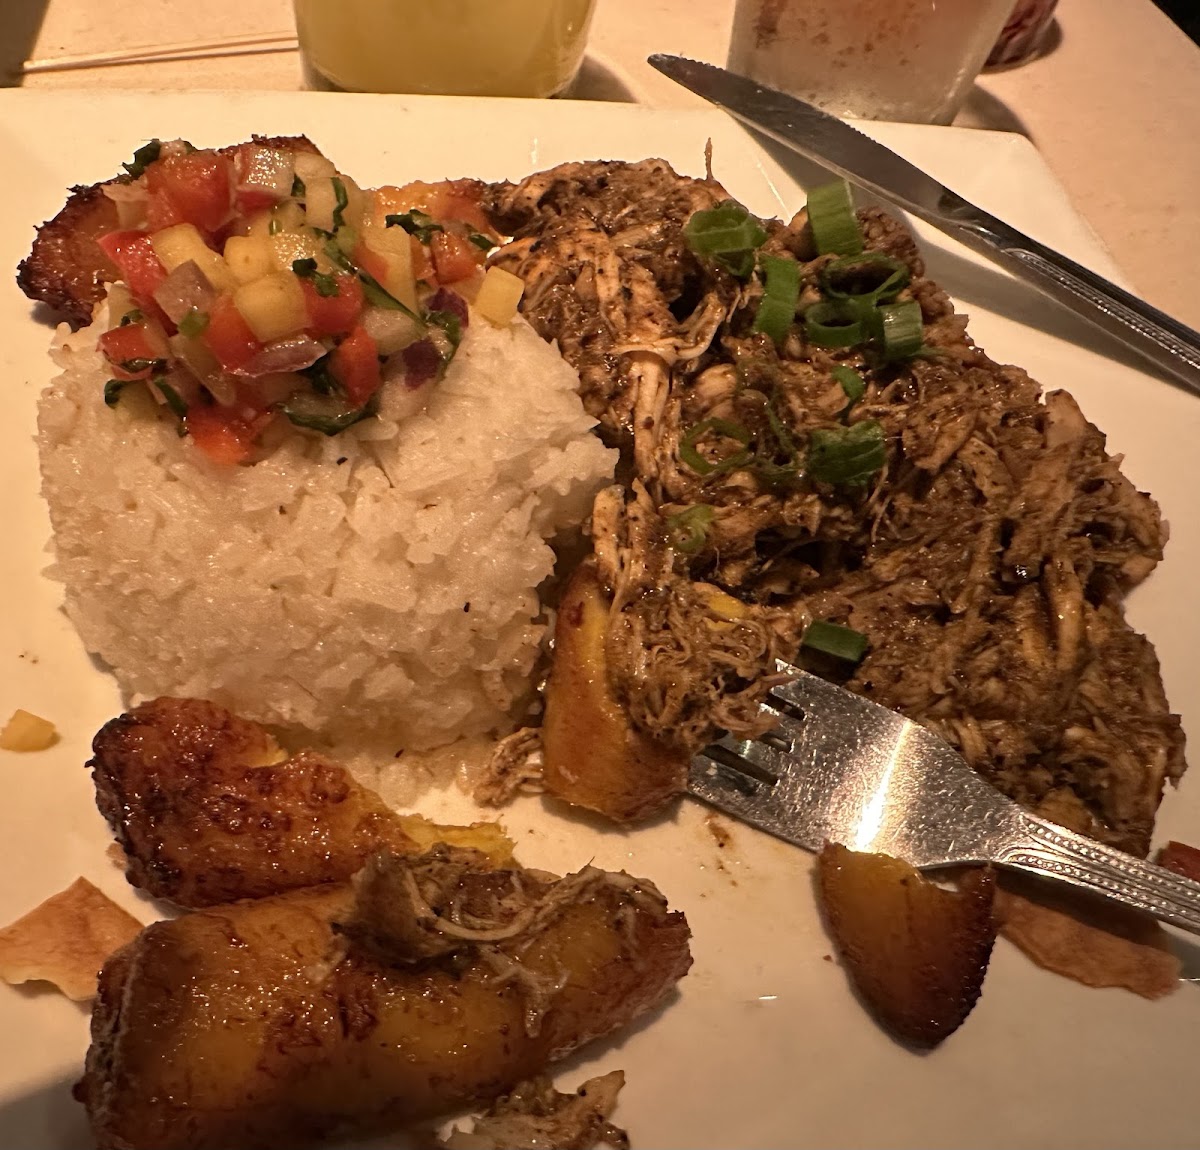 Jawaiian Jerk Chicken without corn bread makes it GF, was given extra plantains ...delicious!